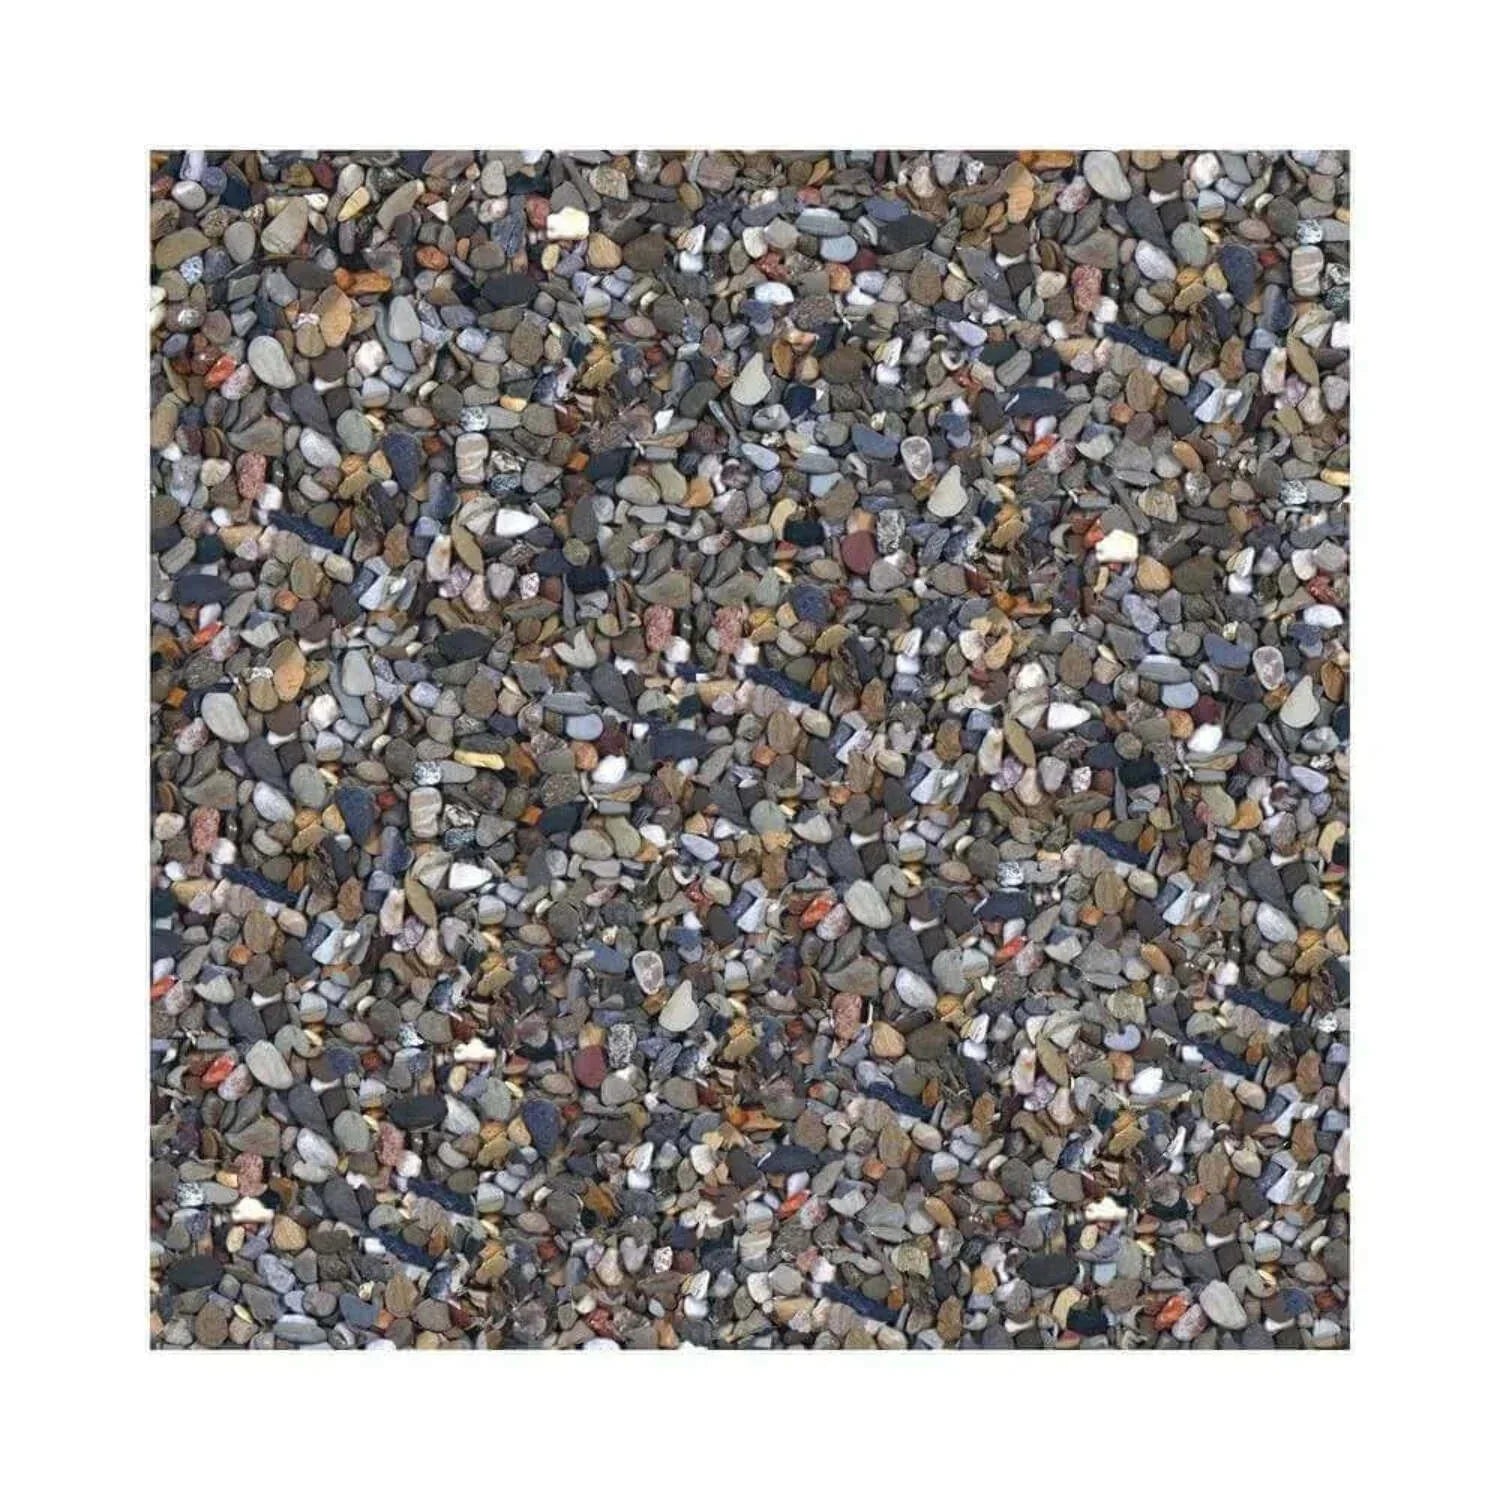 Wholesale prices with free shipping all over United States Nature's Ocean® Bio-Activ Live Gravel ™ - Steven Deals